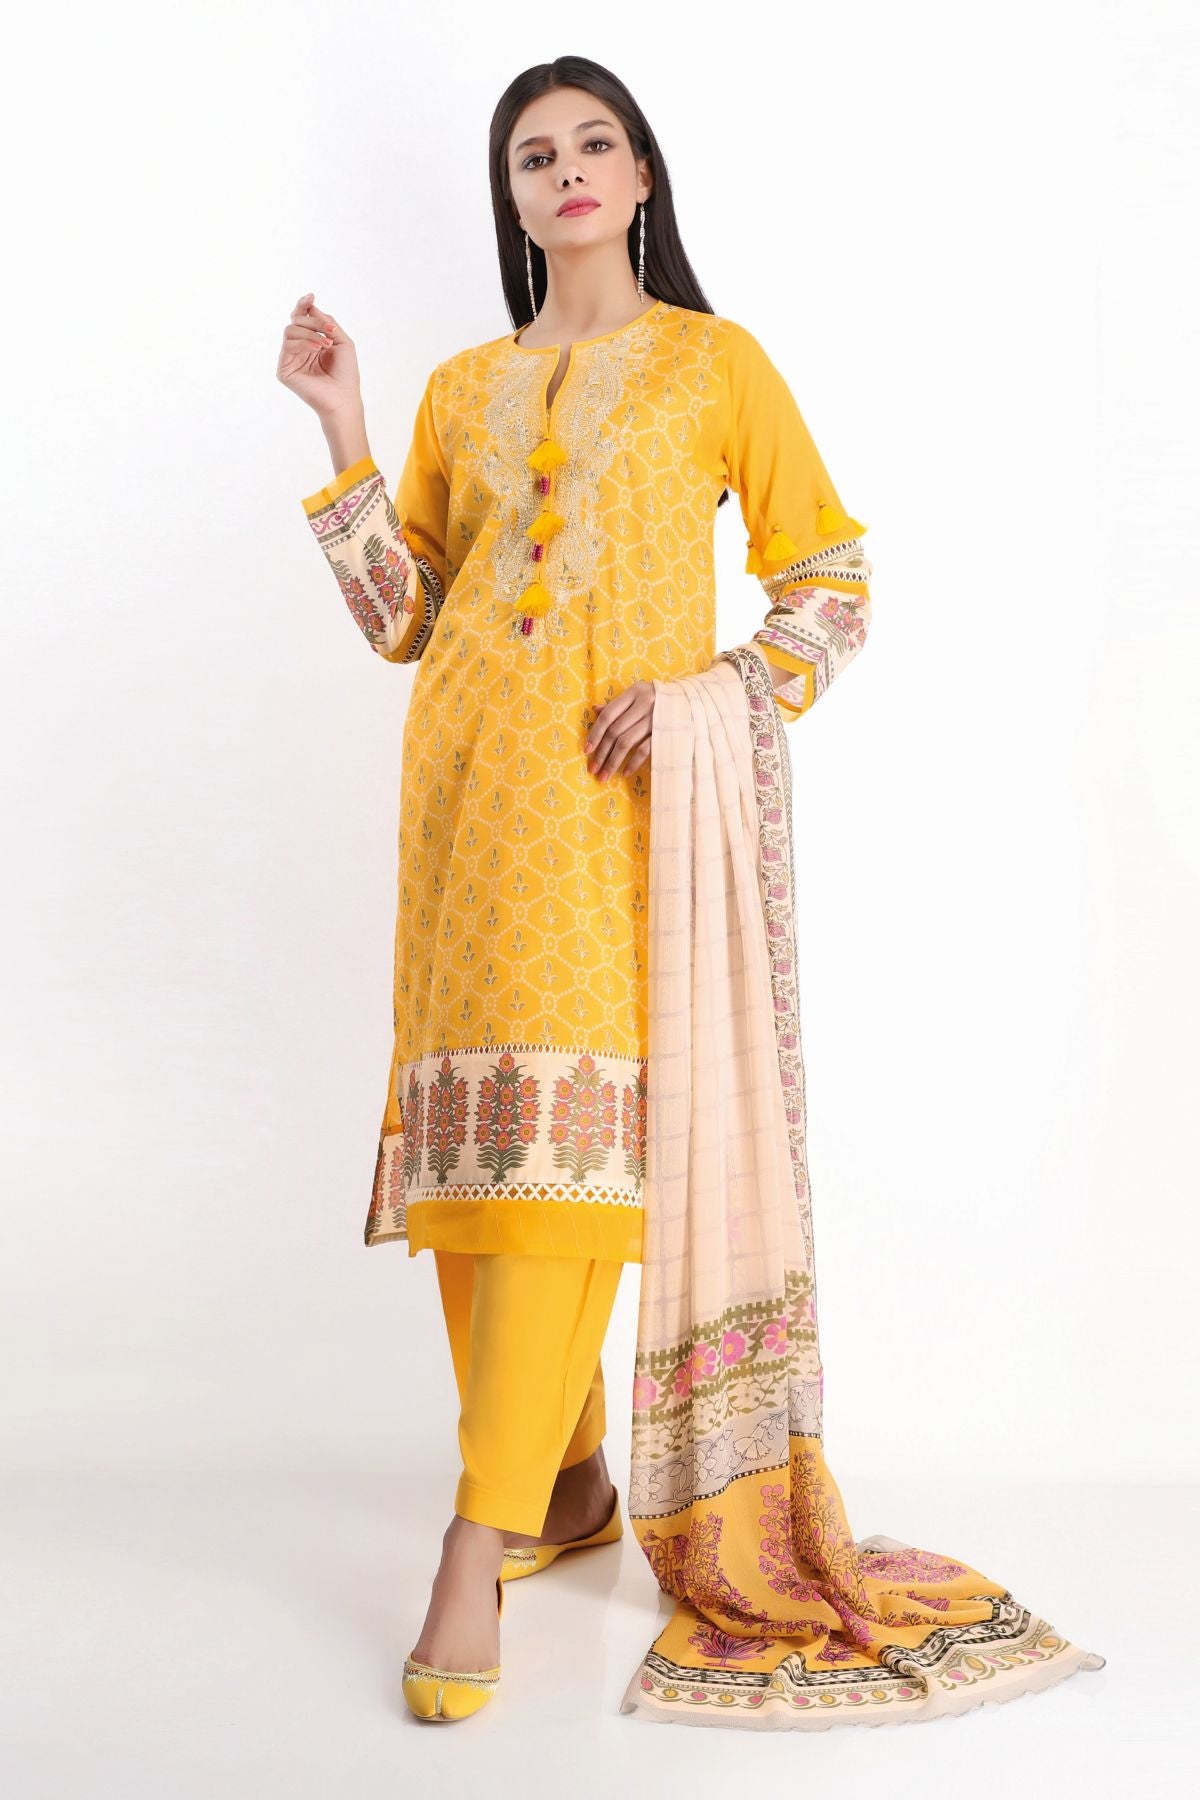 Khaadi 3 Piece Dobby Unstitched Suit R-20202 A YELLOW